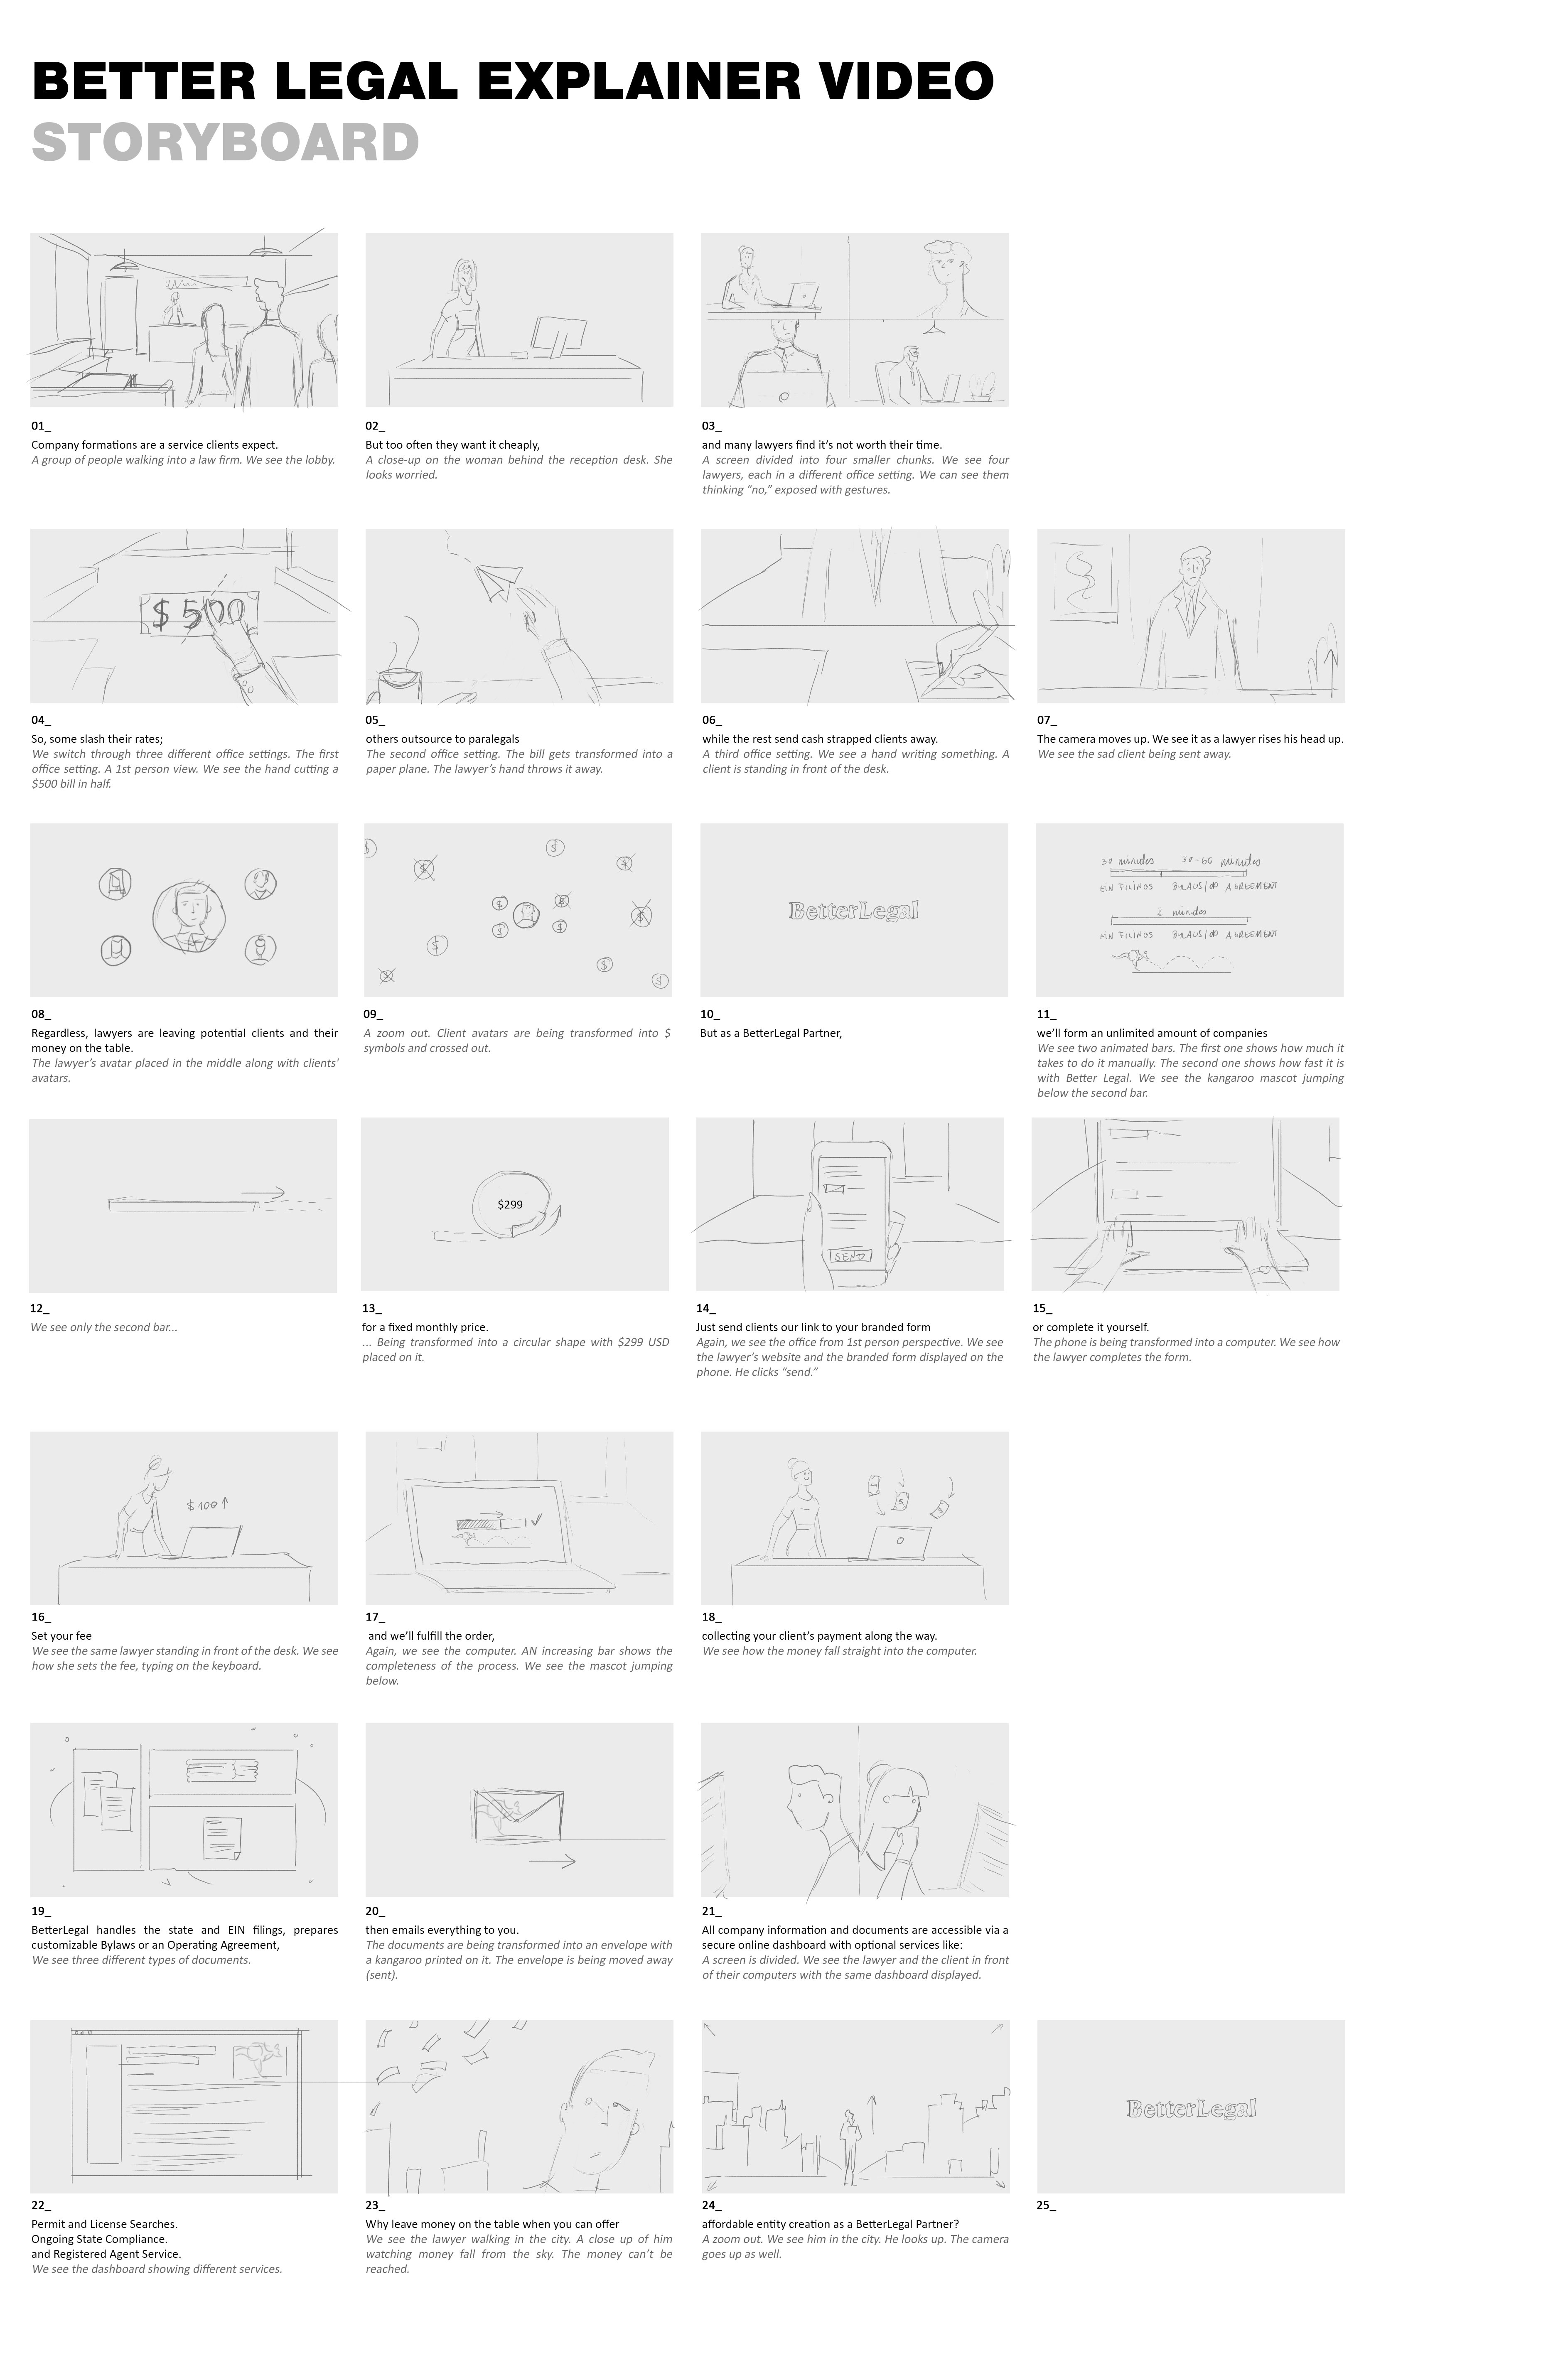 Storyboard for a marketing video